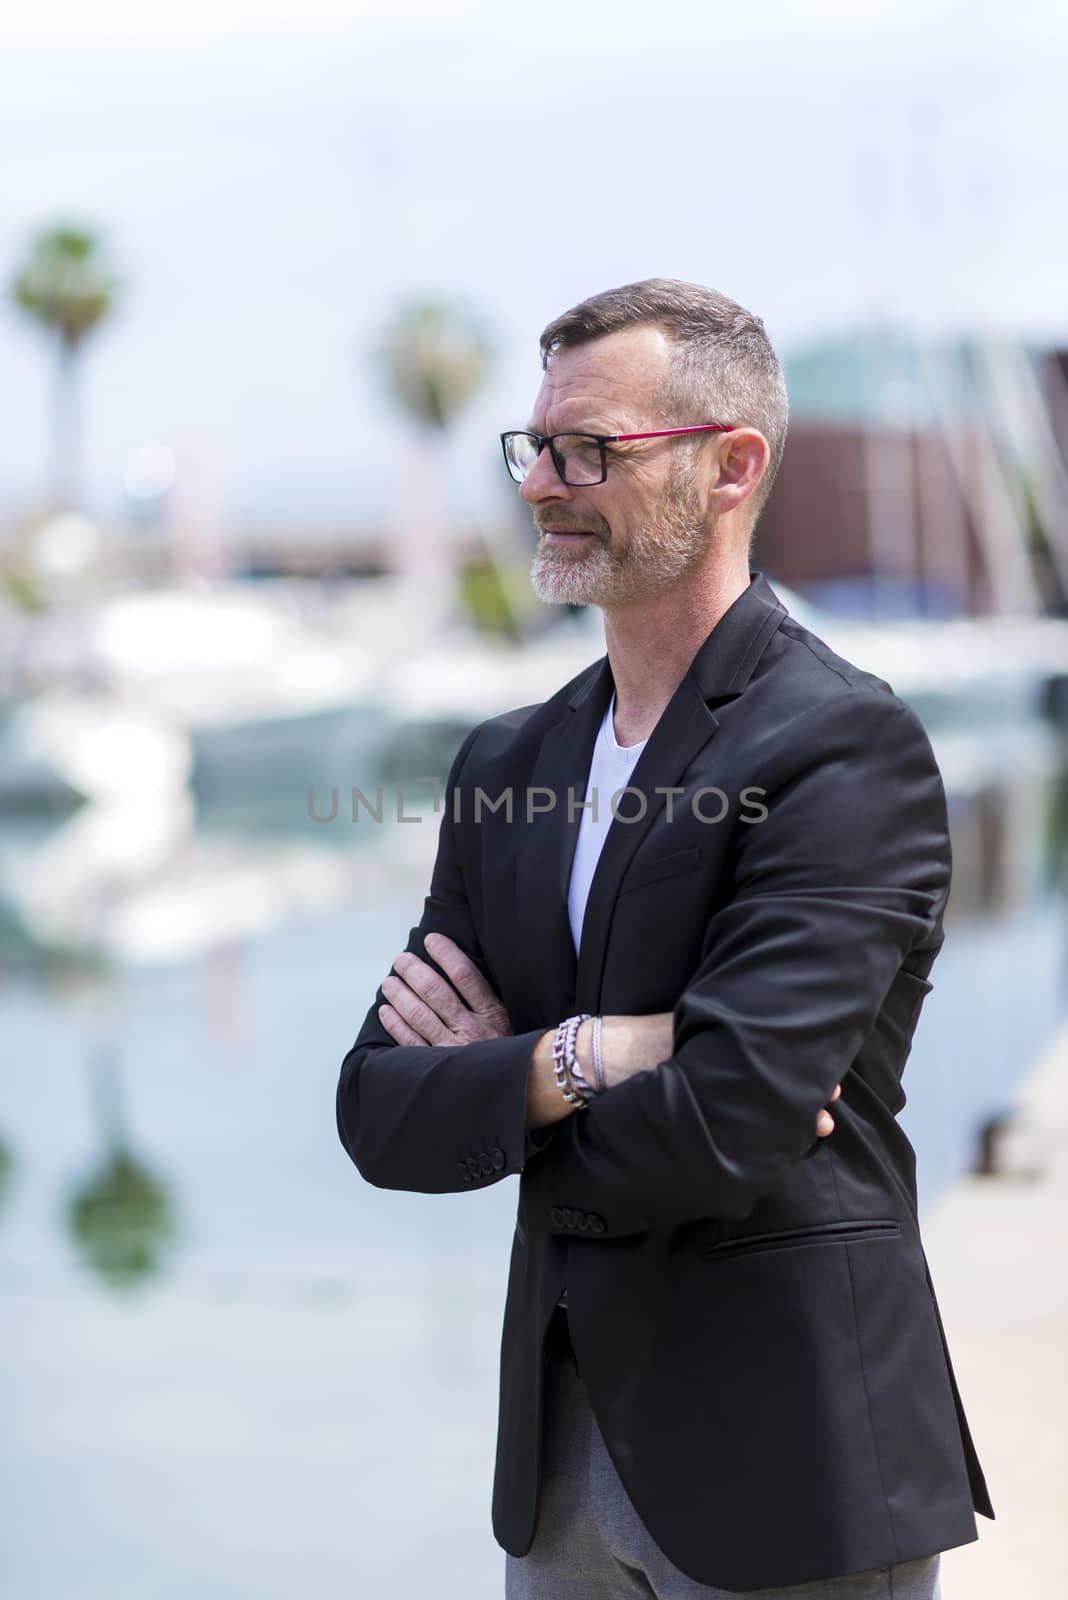 Businessman standing in the city arms crossed while looking away and smiling